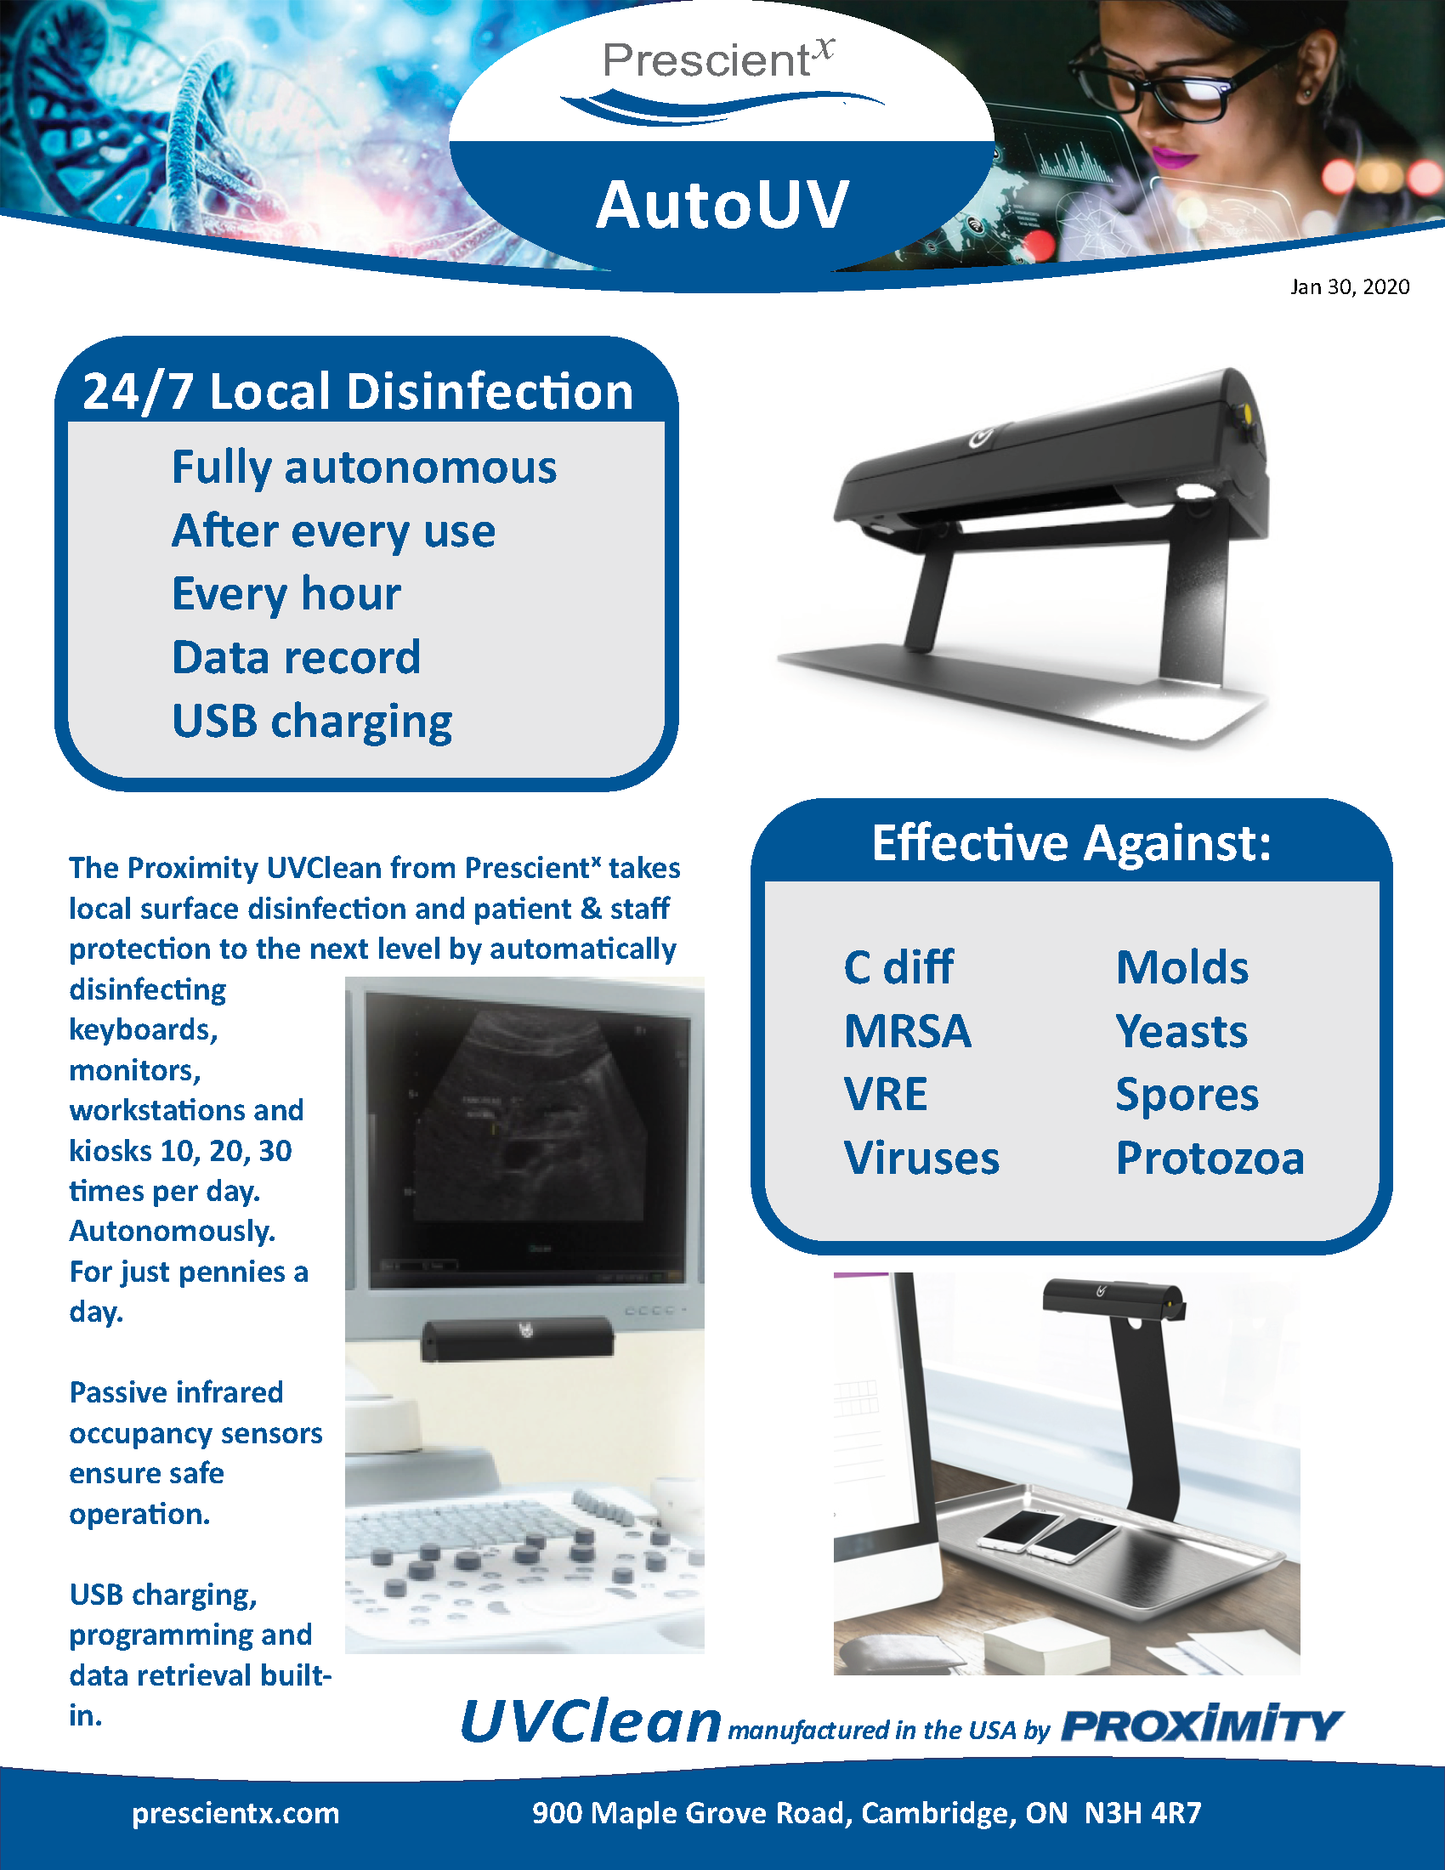 Surface Mount AutoUV Monitor & Keyboard Disinfector